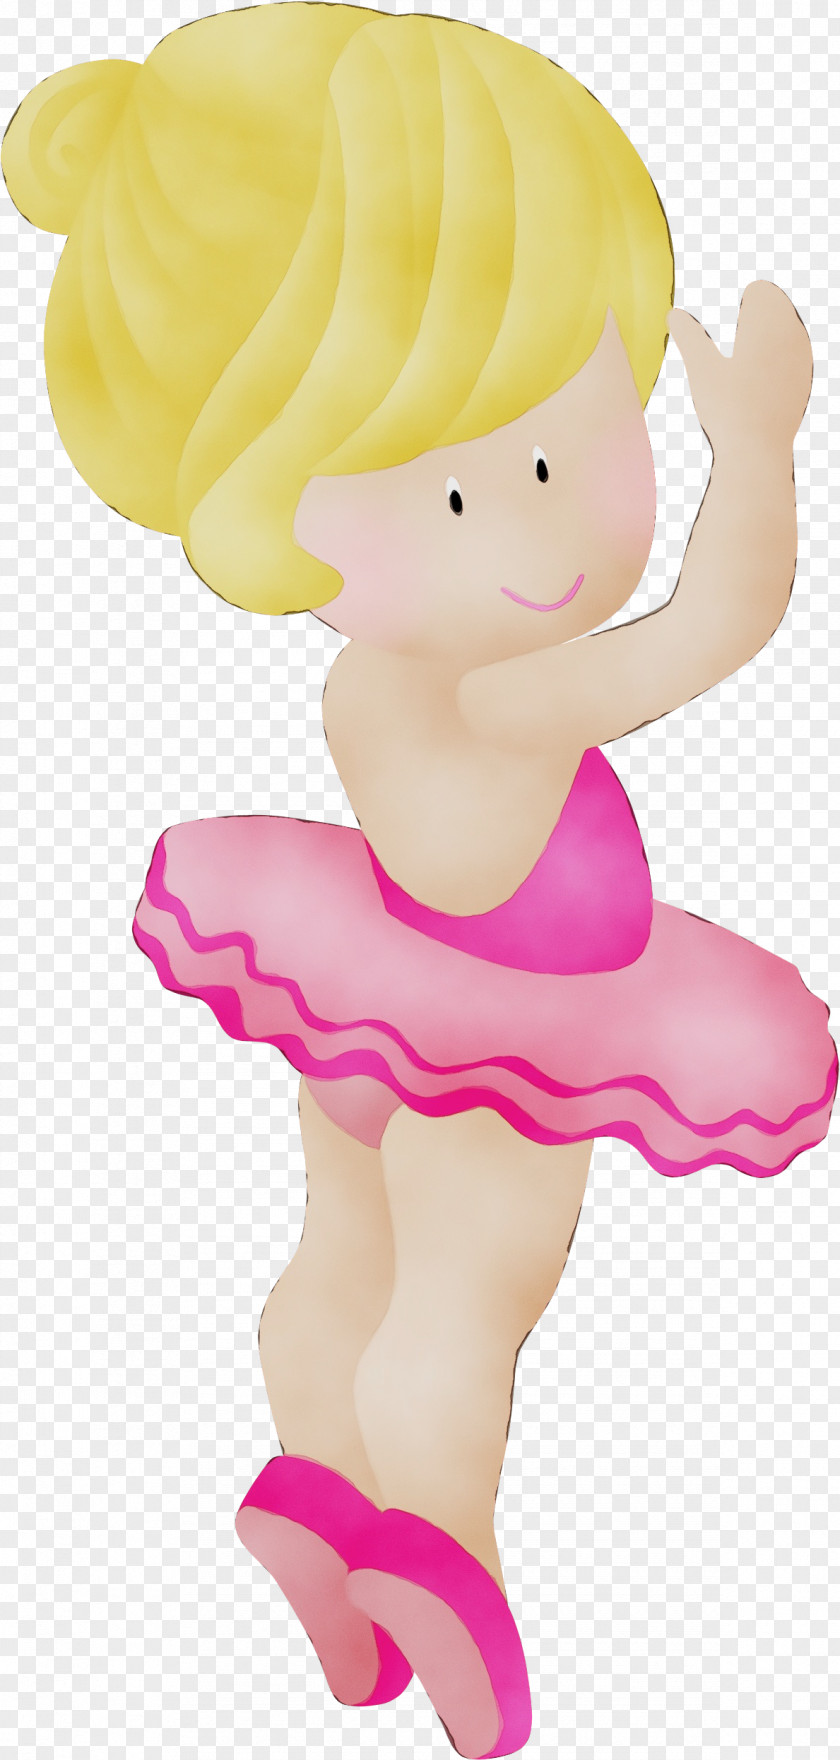 Smile Animation Cartoon Pink Clip Art Figurine Muscle PNG